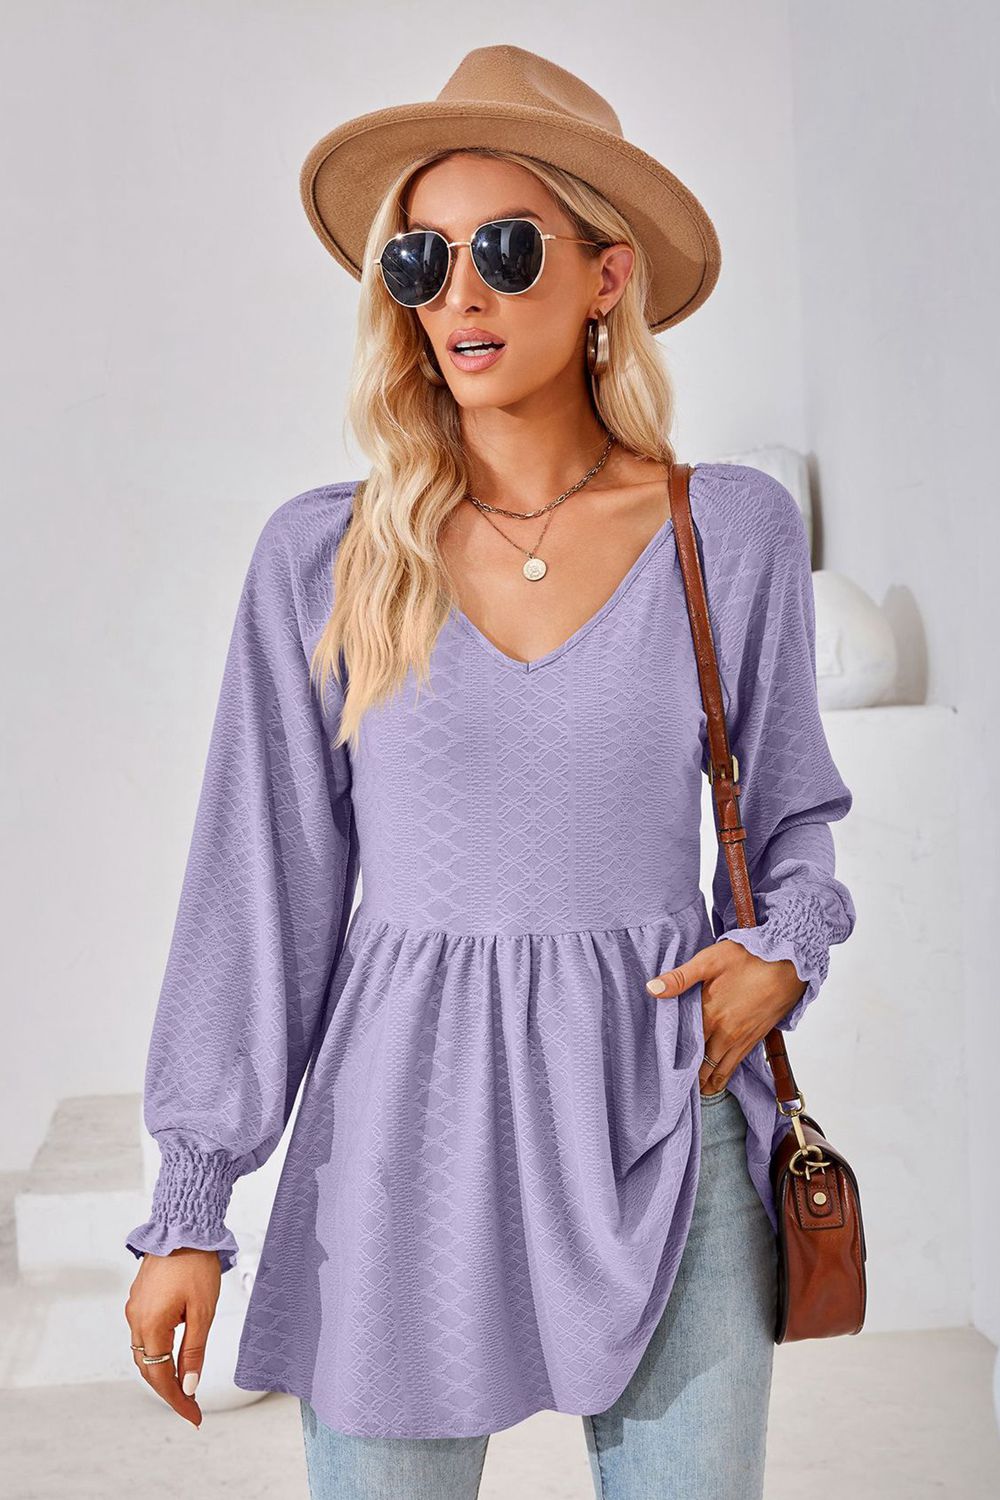 V-Neck Lantern Sleeve Blouse - Purple / S - Women’s Clothing & Accessories - Shirts & Tops - 1 - 2024